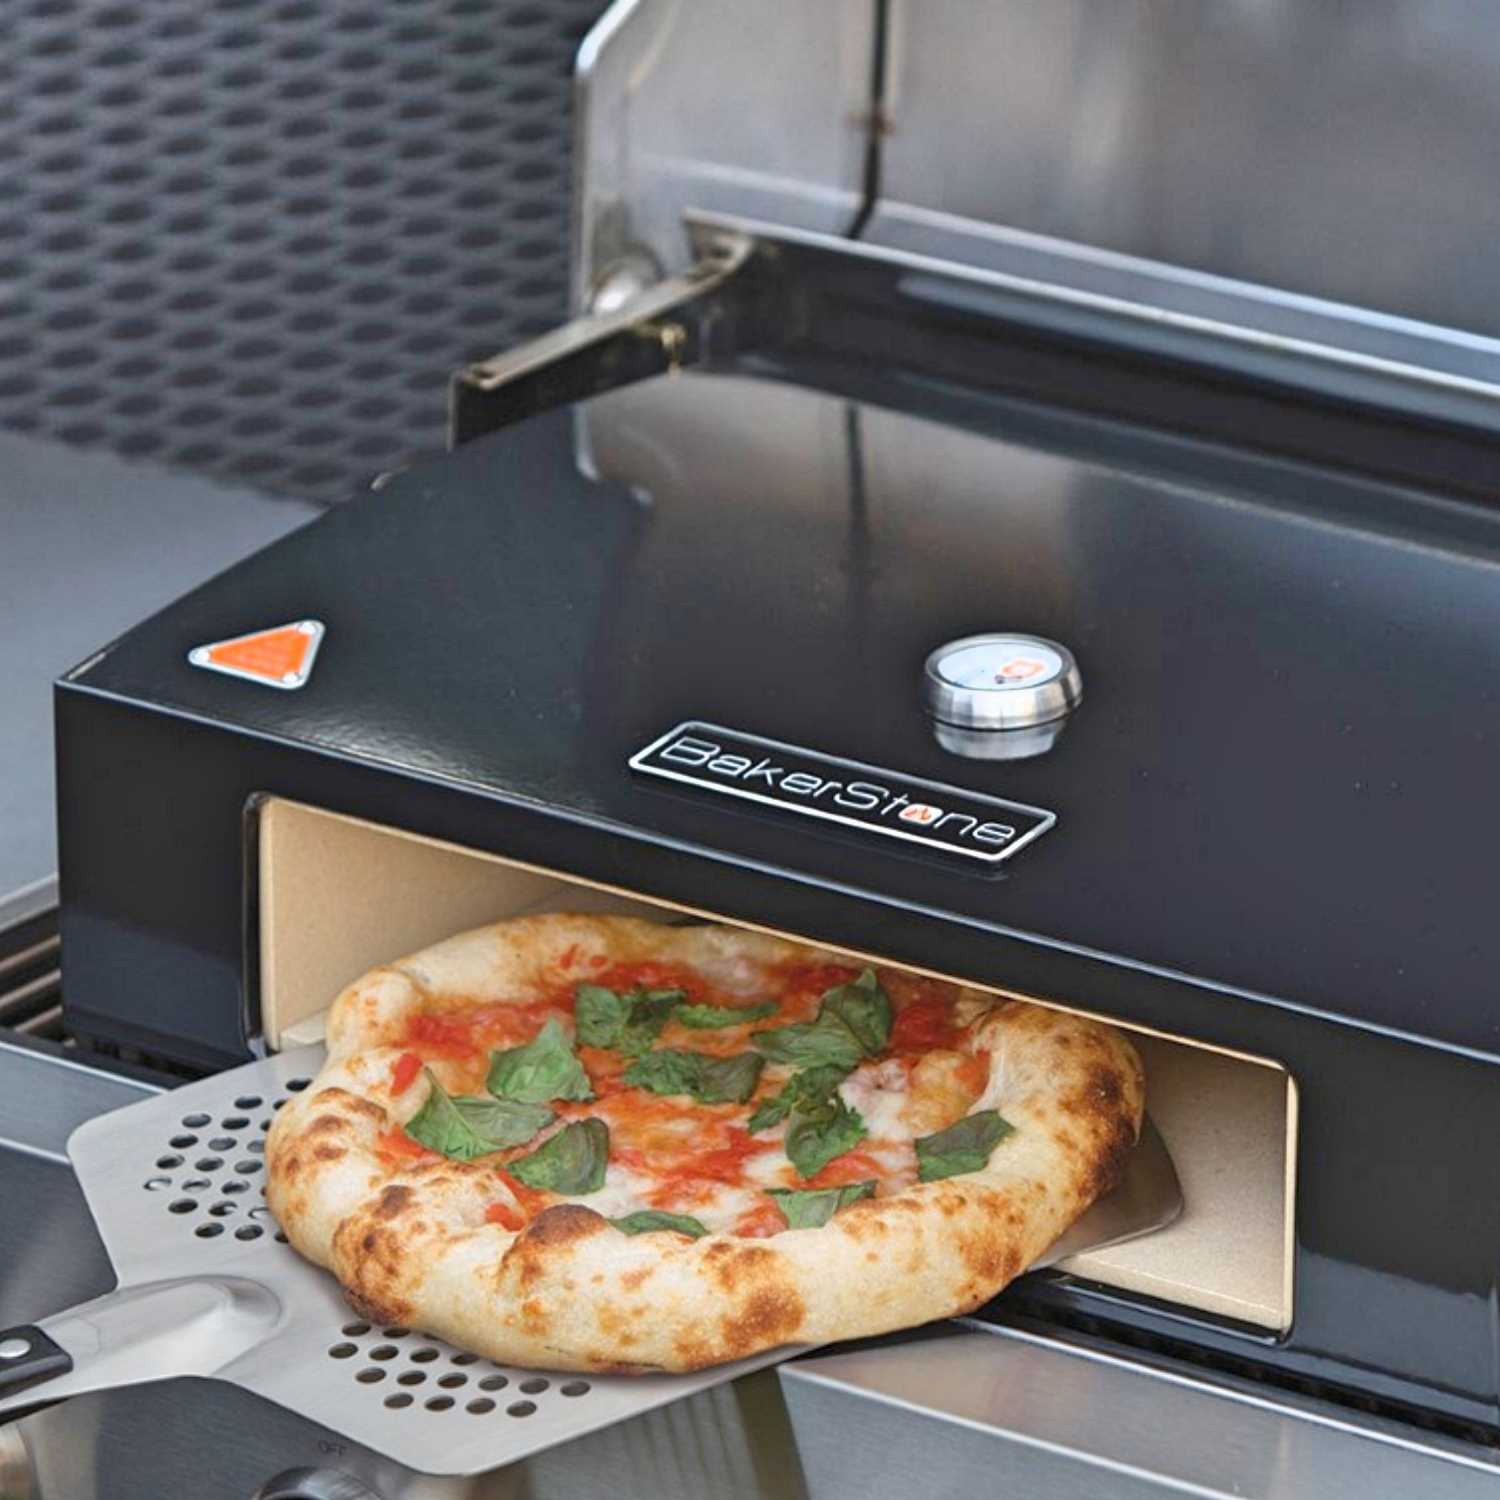 BakerStone Gas Grill Pizza Oven Conversion Box In Use - Cool Birthday Gifts For Men